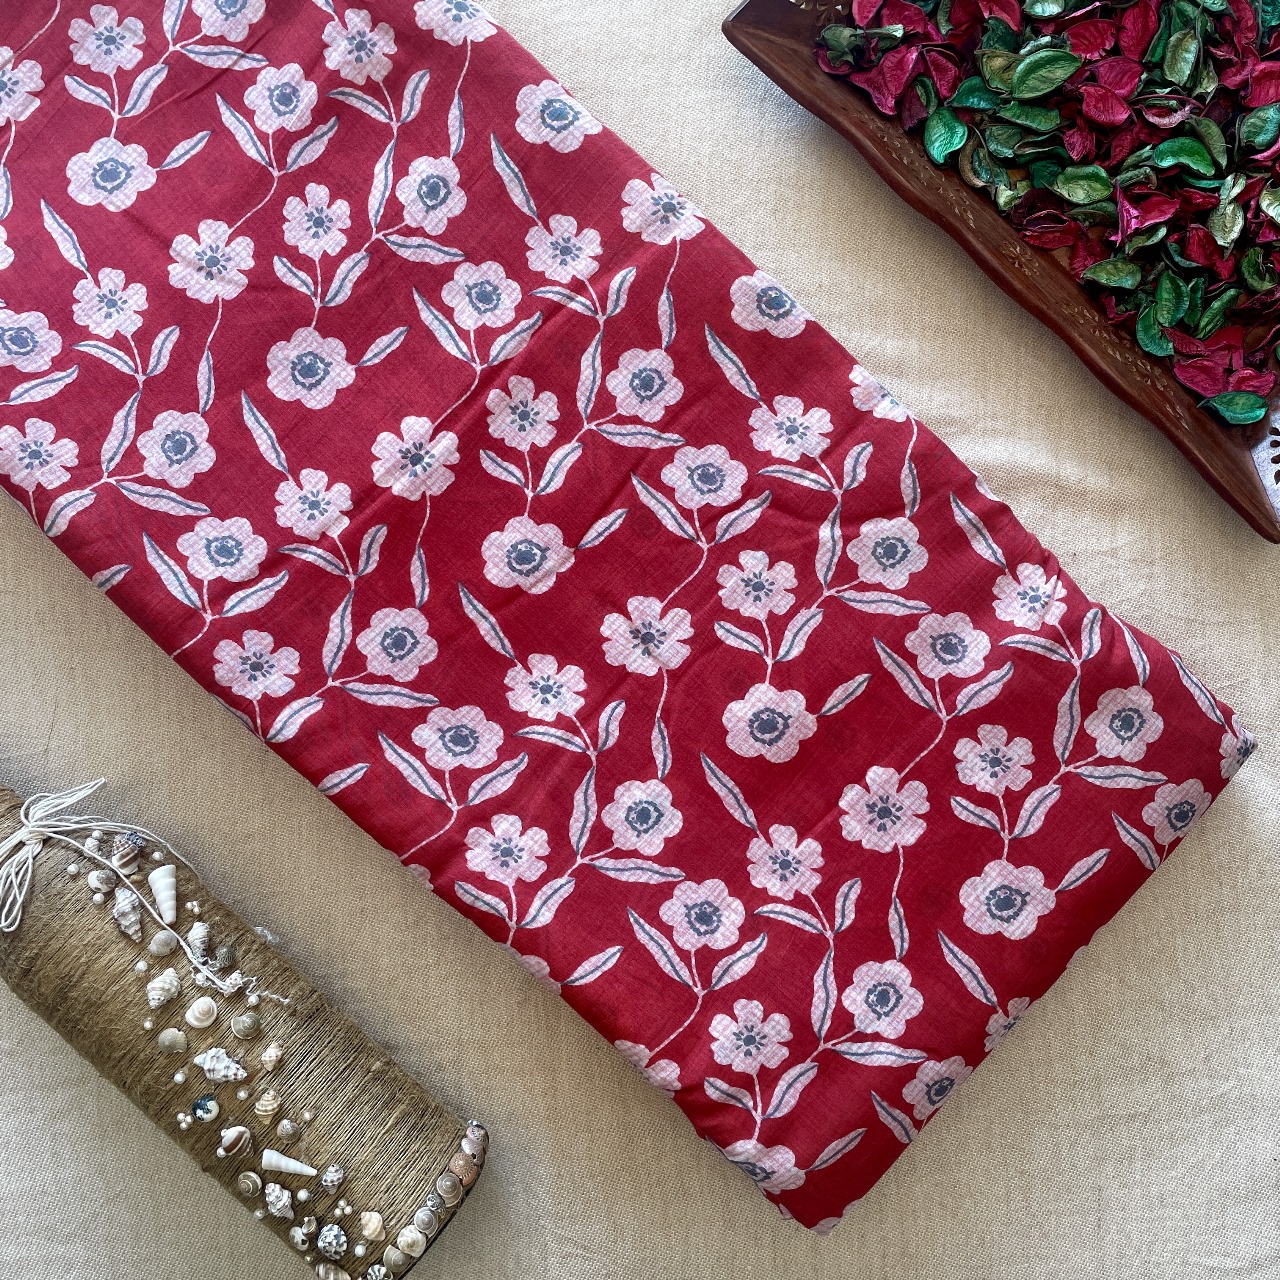 Pure Muslin Printed Fabric - Red/White - Floral